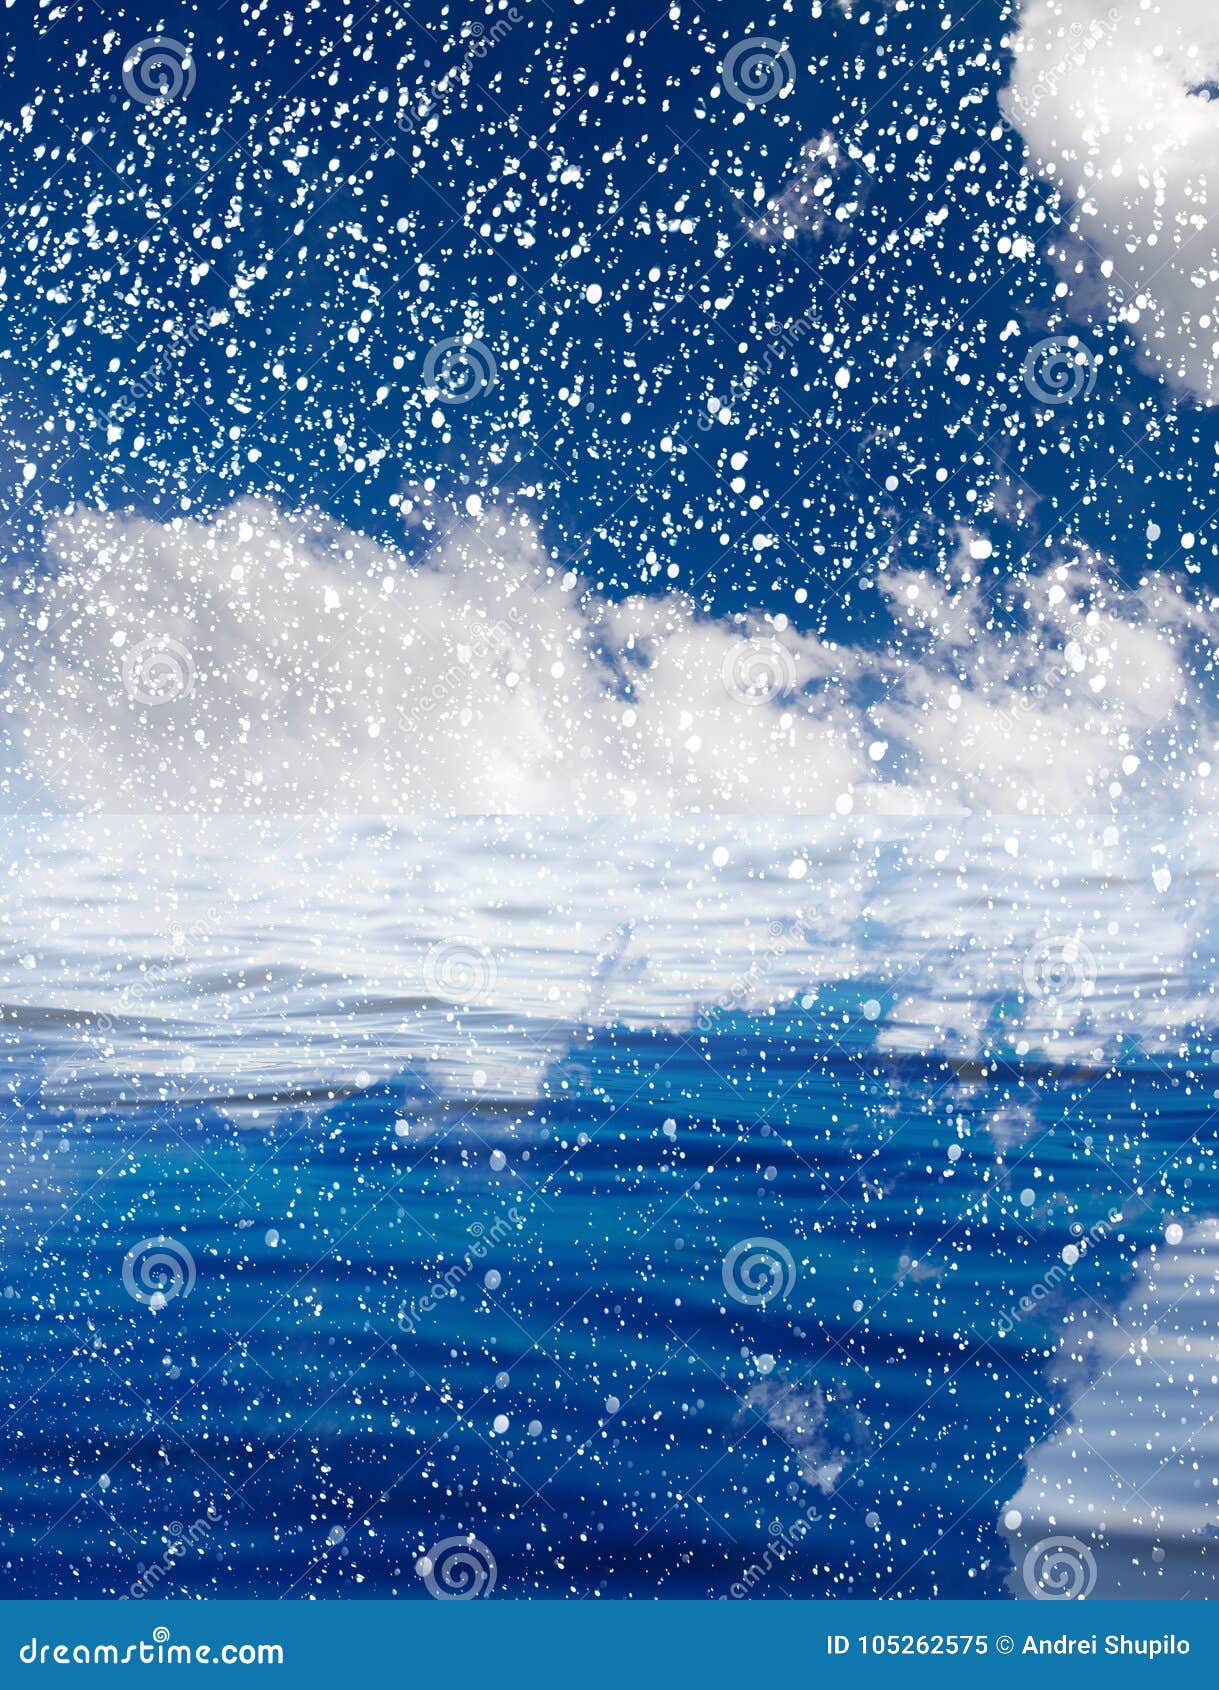 Snowing At Sea With A Beautiful Sky Beautiful Background Stock Image